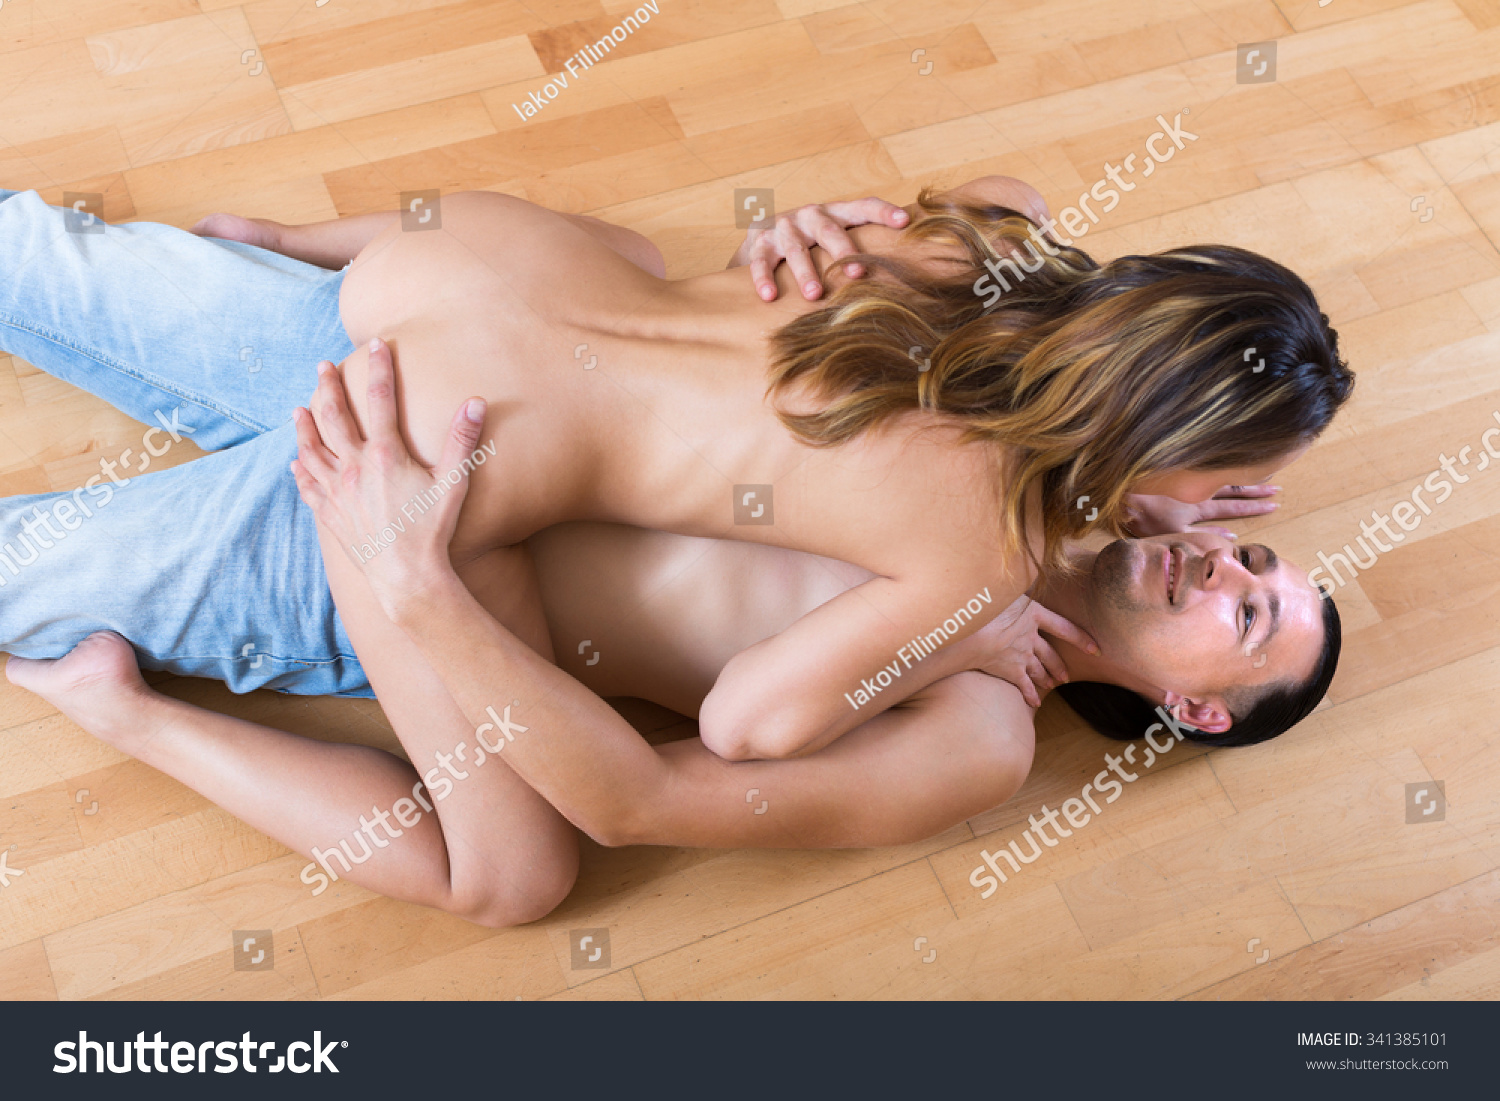 sex pic wit men and woman nude